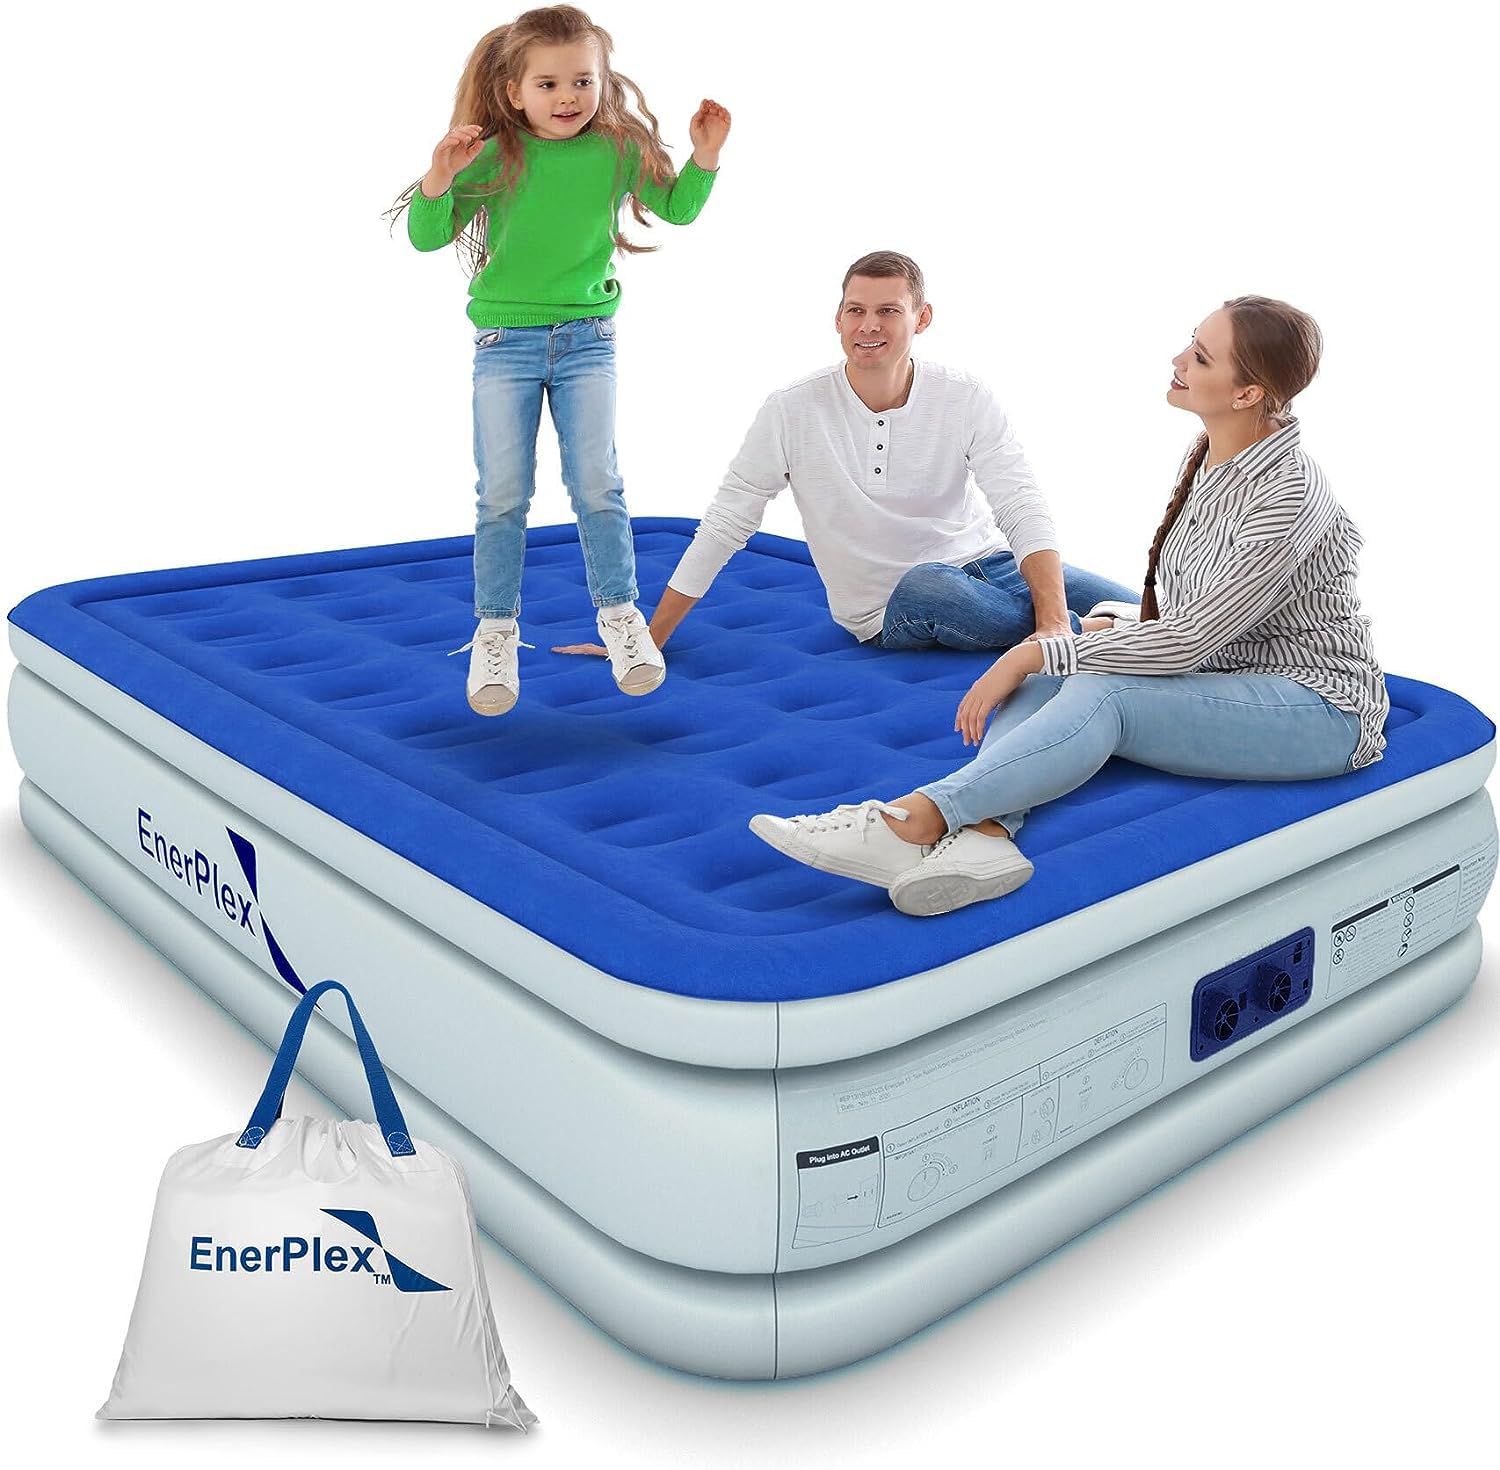 EnerPlex Queen Air Mattress with Built-in Pump - 16 Inch Double Height Inflatable Mattress for Camping, Home & Portable Travel - Durable Blow Up Bed with Dual Pump - Easy to Inflate/Quick Set Up?